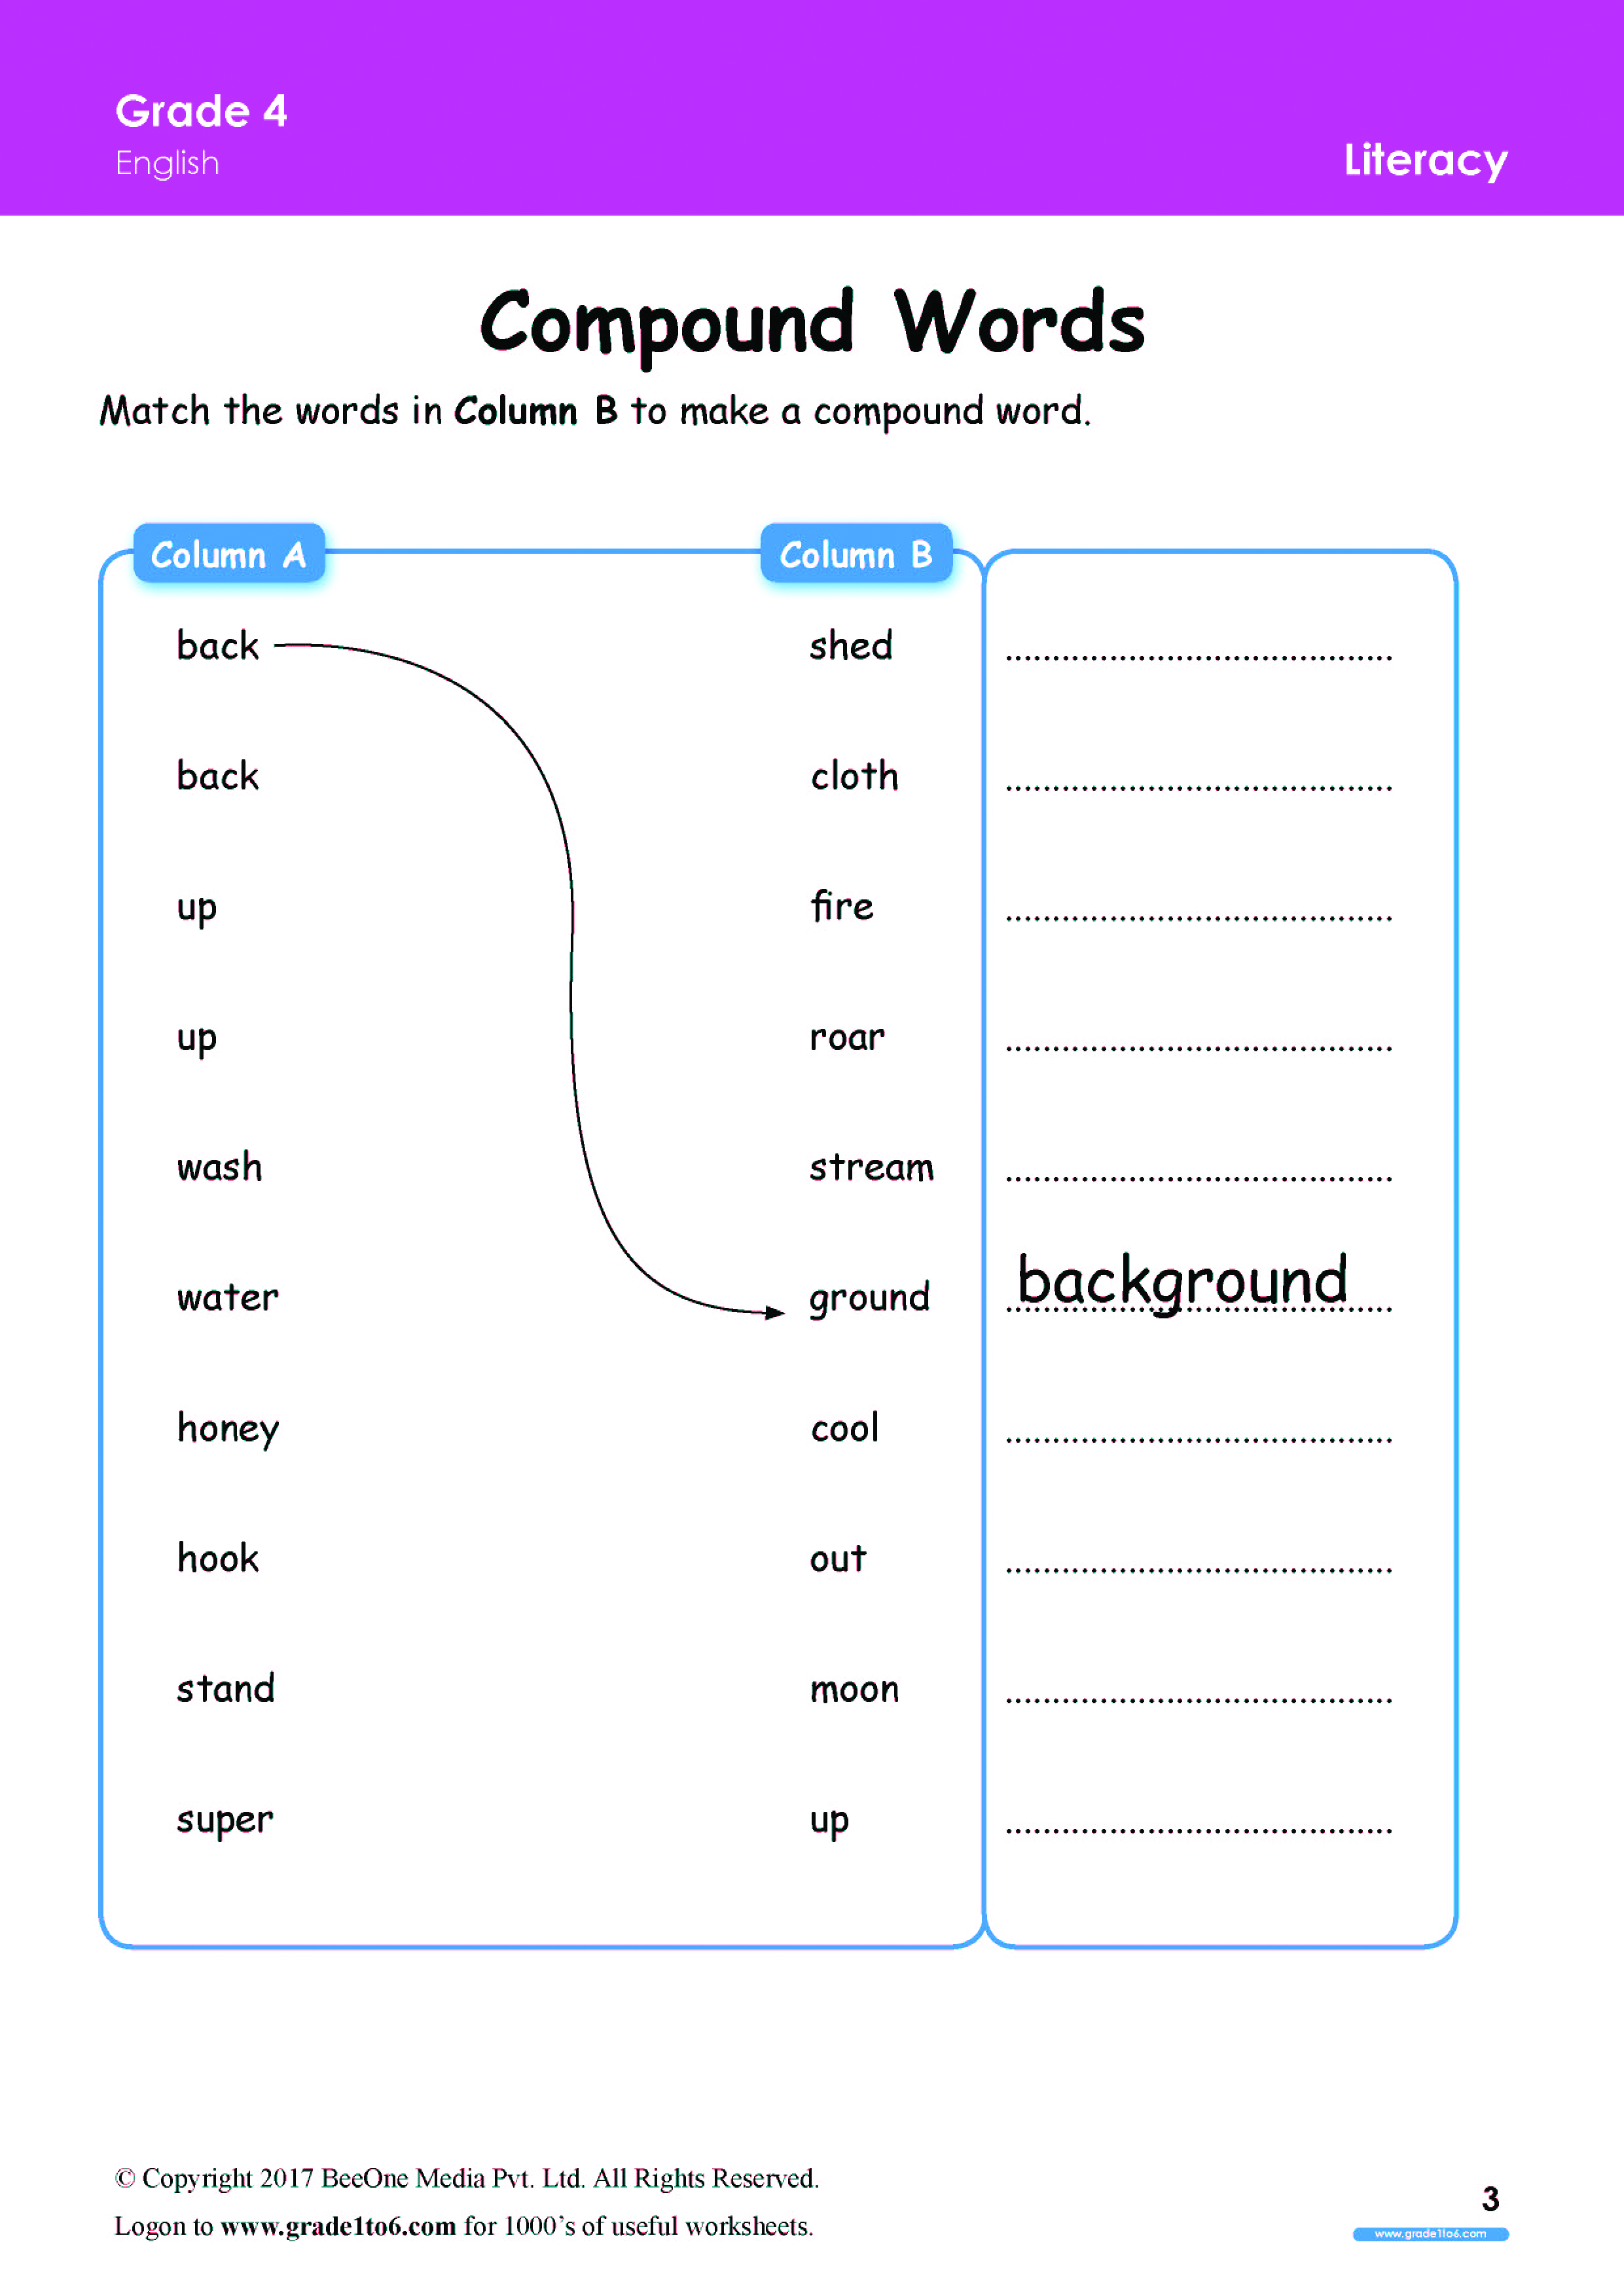 Compound Words Worksheets For Grade 4 www grade1to6